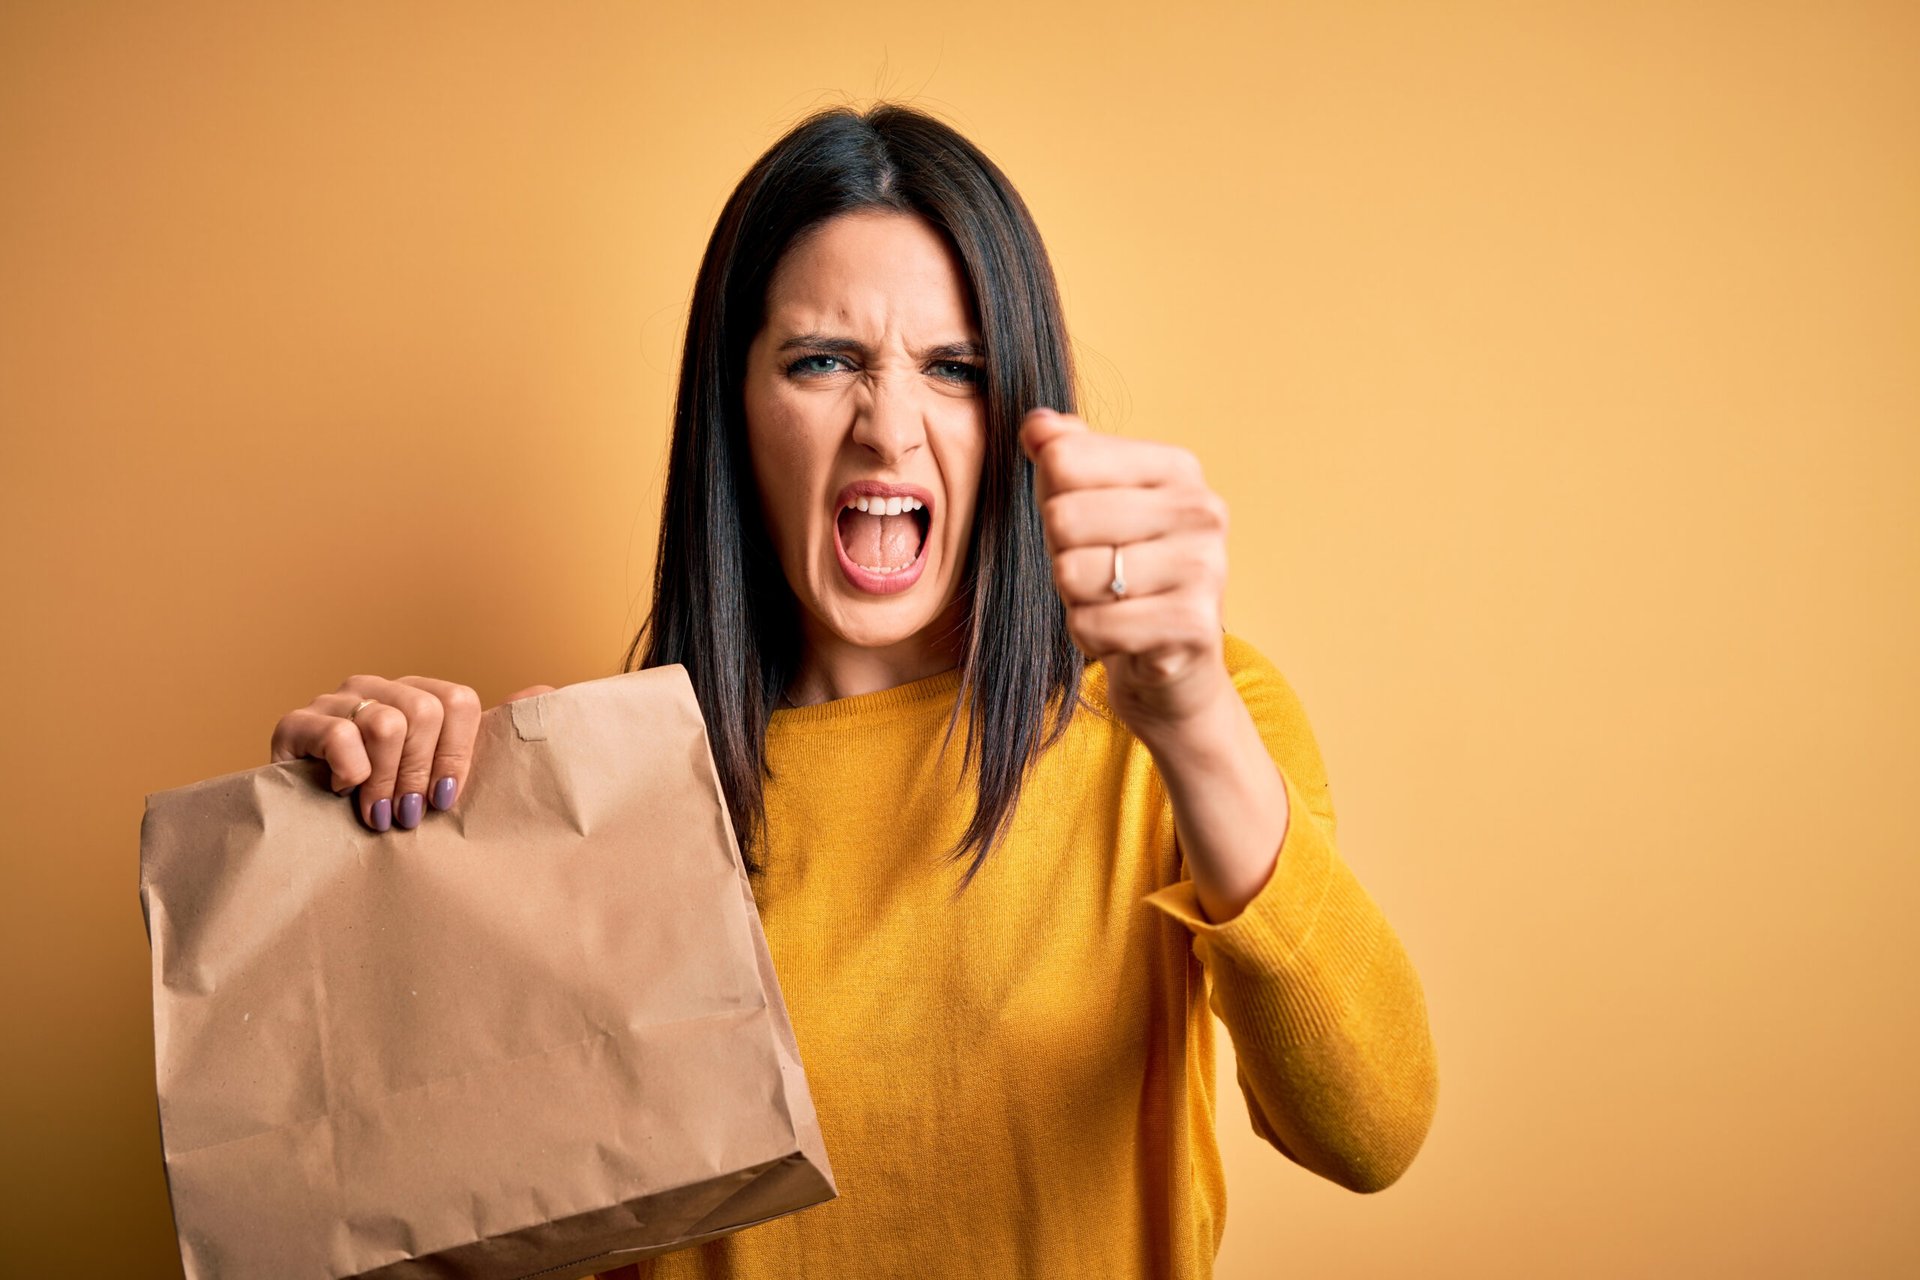 Unhappy woman with food delivery